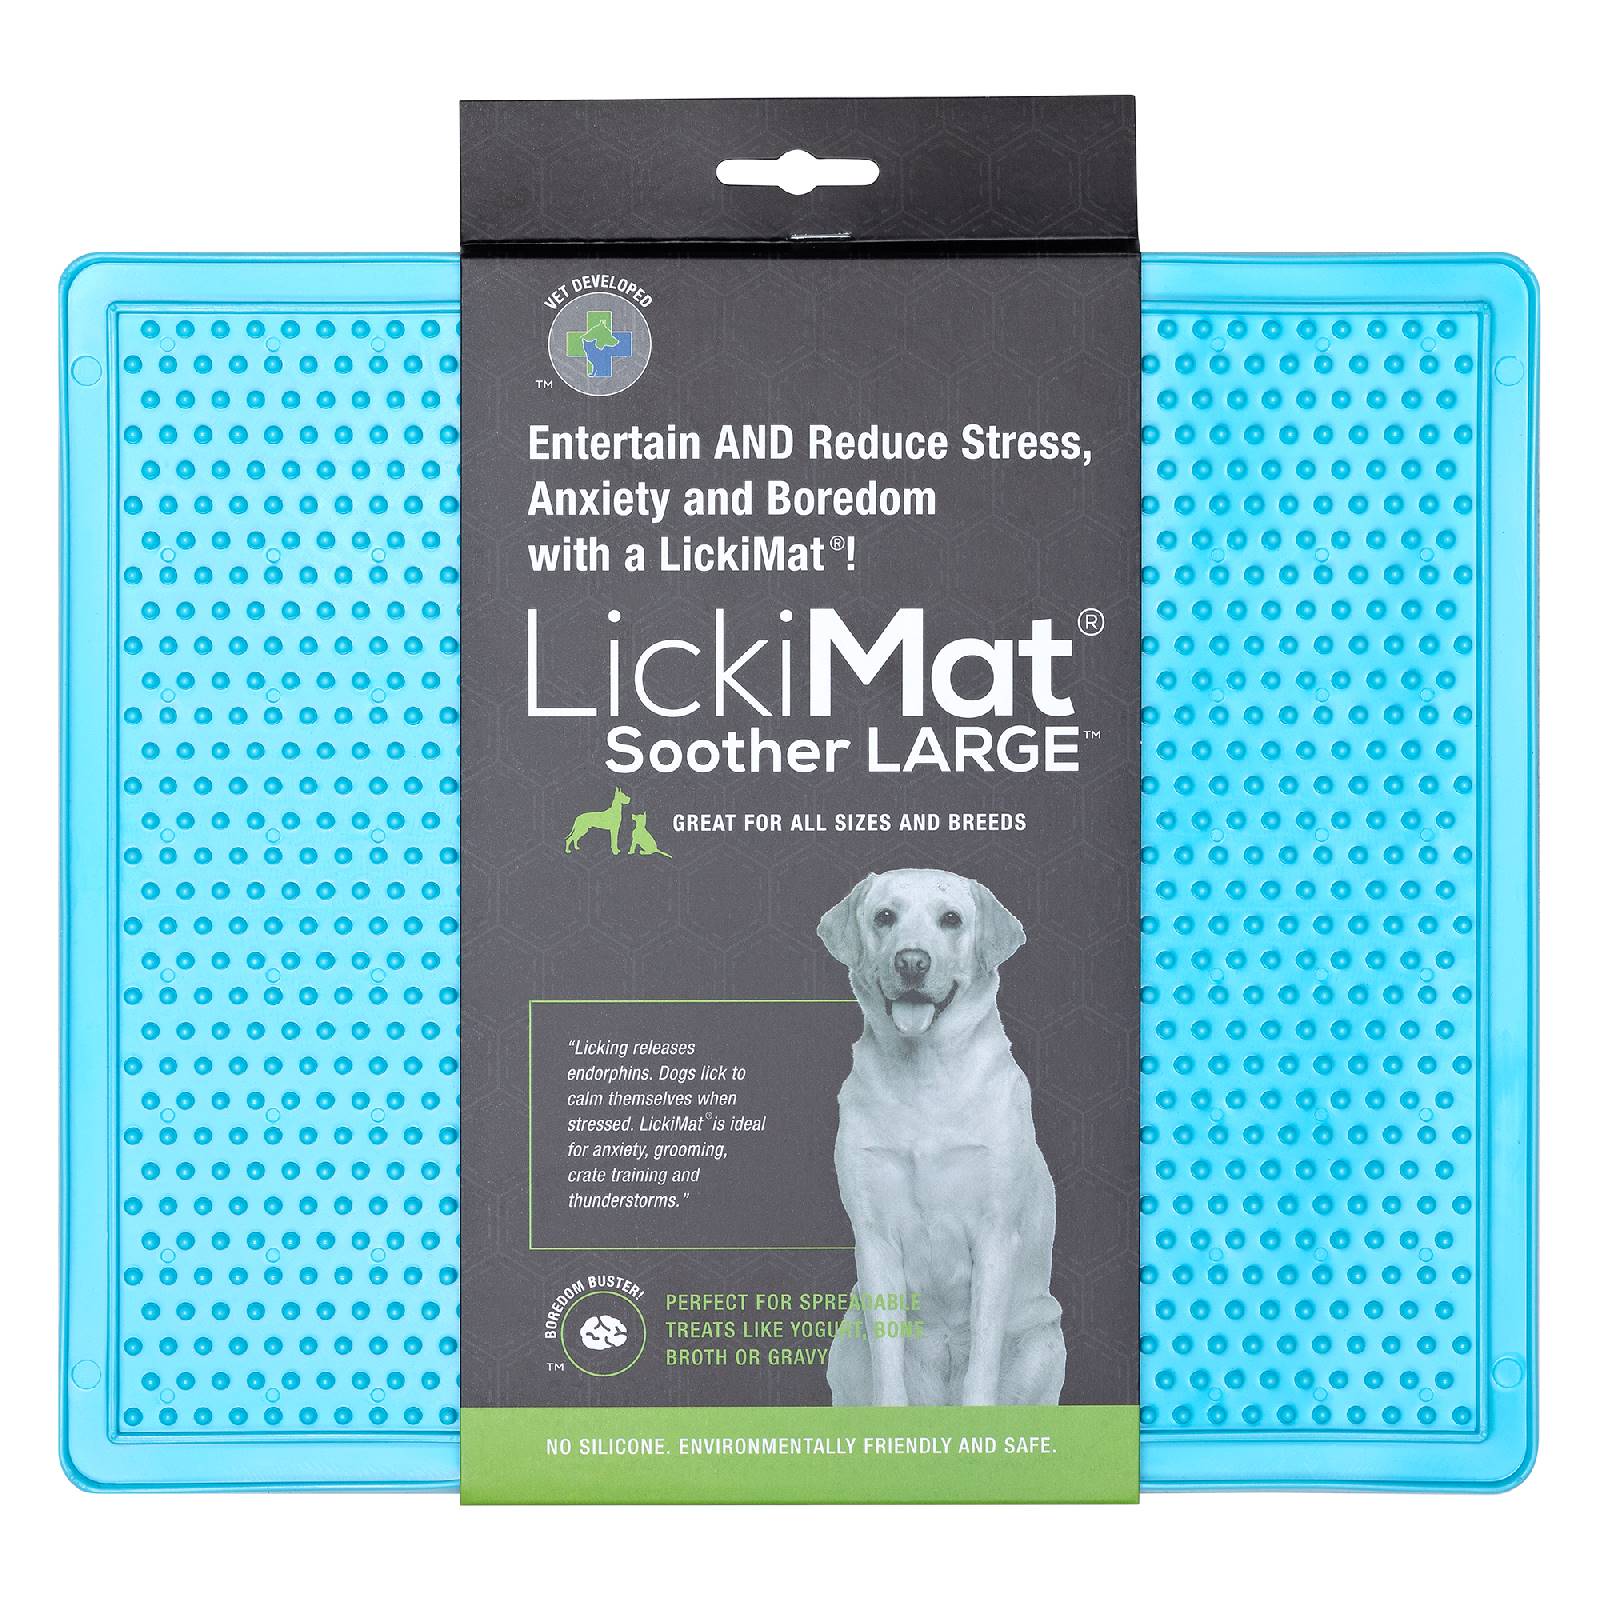 LickiMat Soother LARGE Slow Feeder Mat